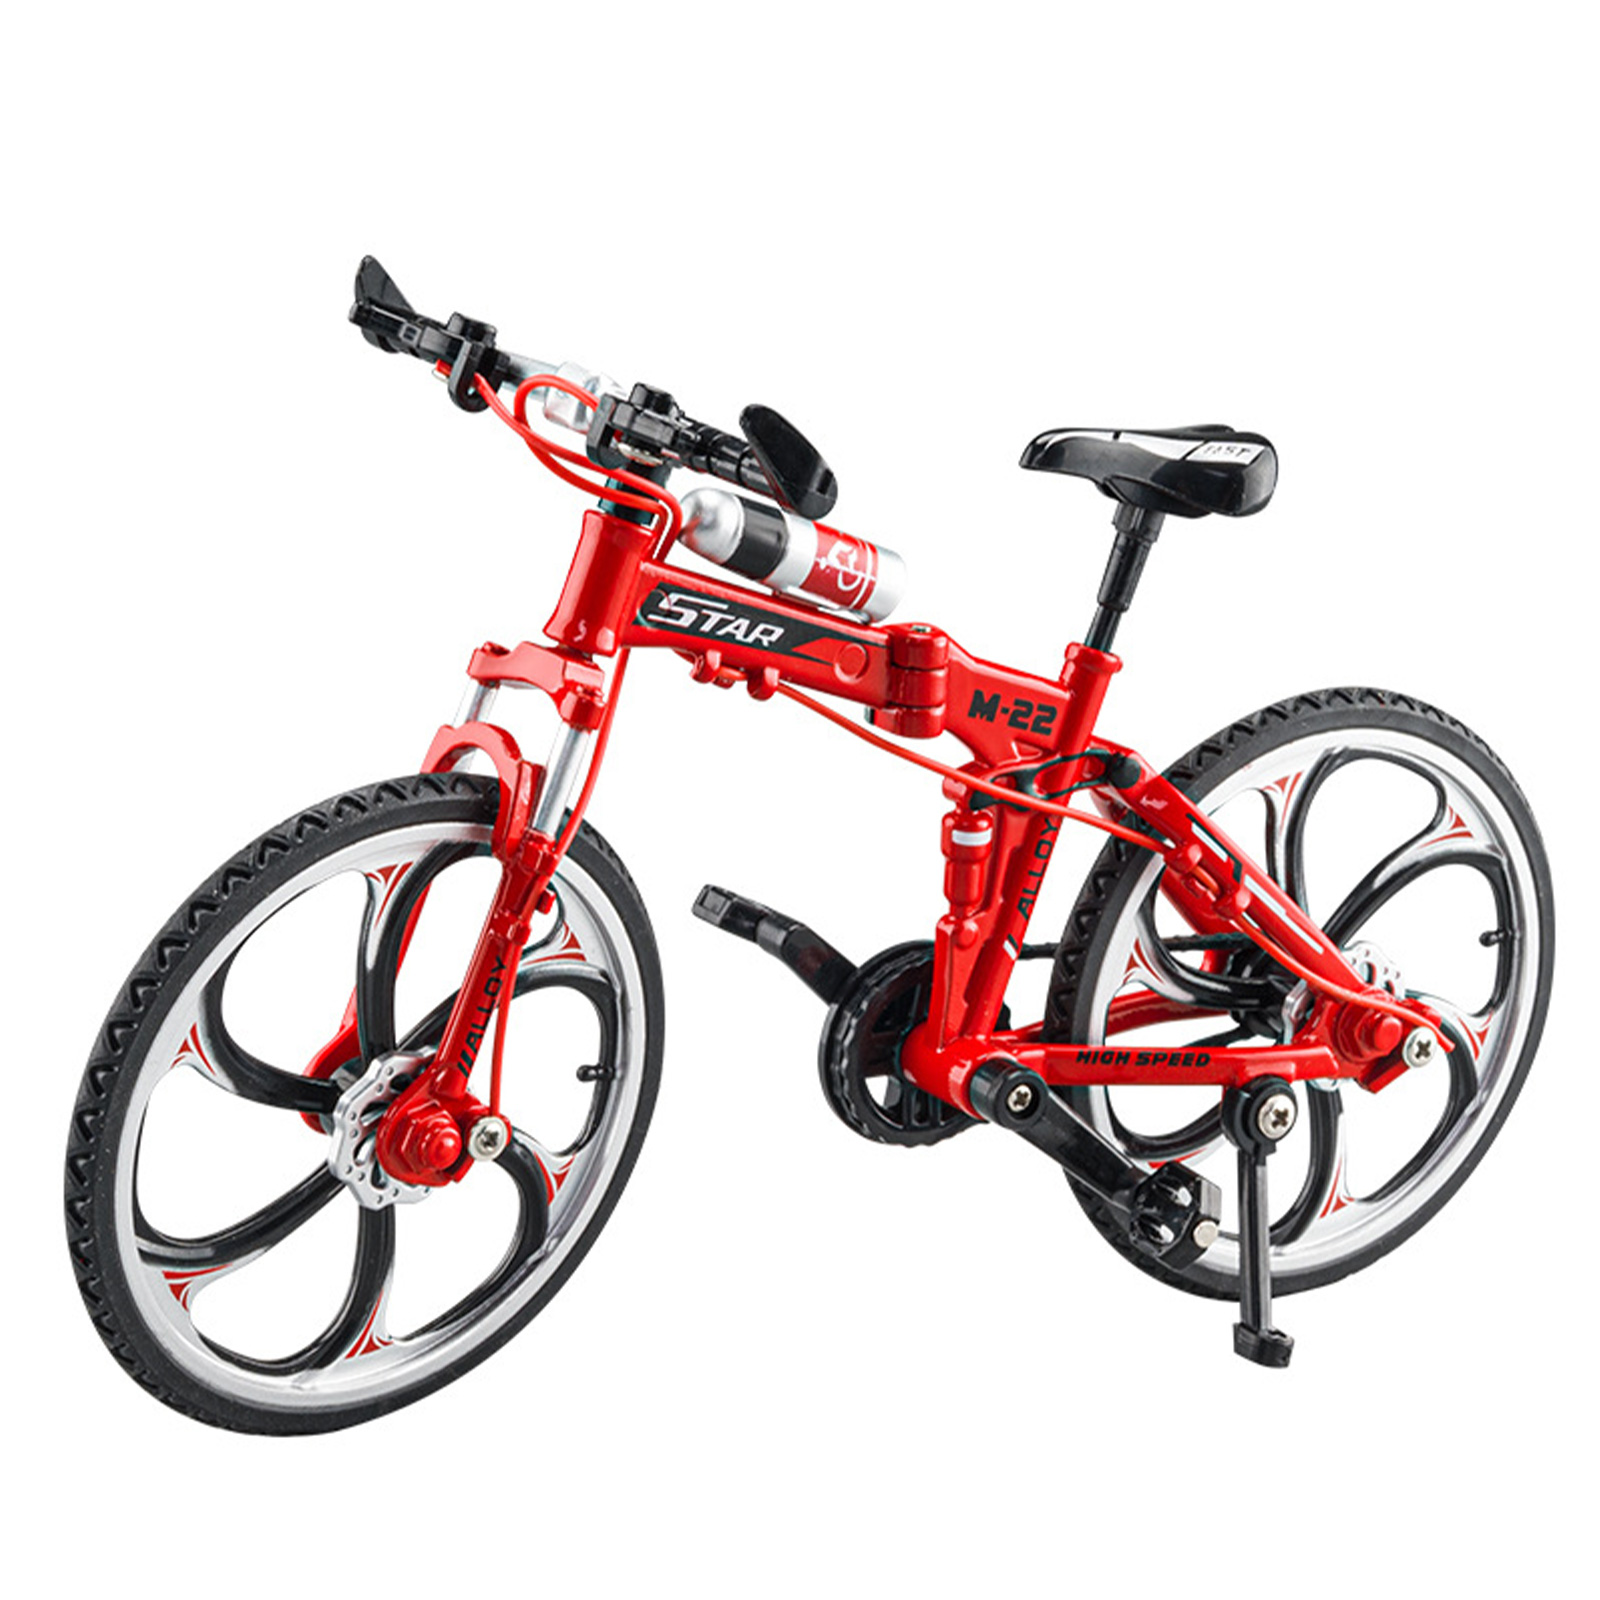 1/8 Alloy Mountain Bike Model Simulation Sliding Steering Mtb Bicycle Toys For Children Gifts Collection